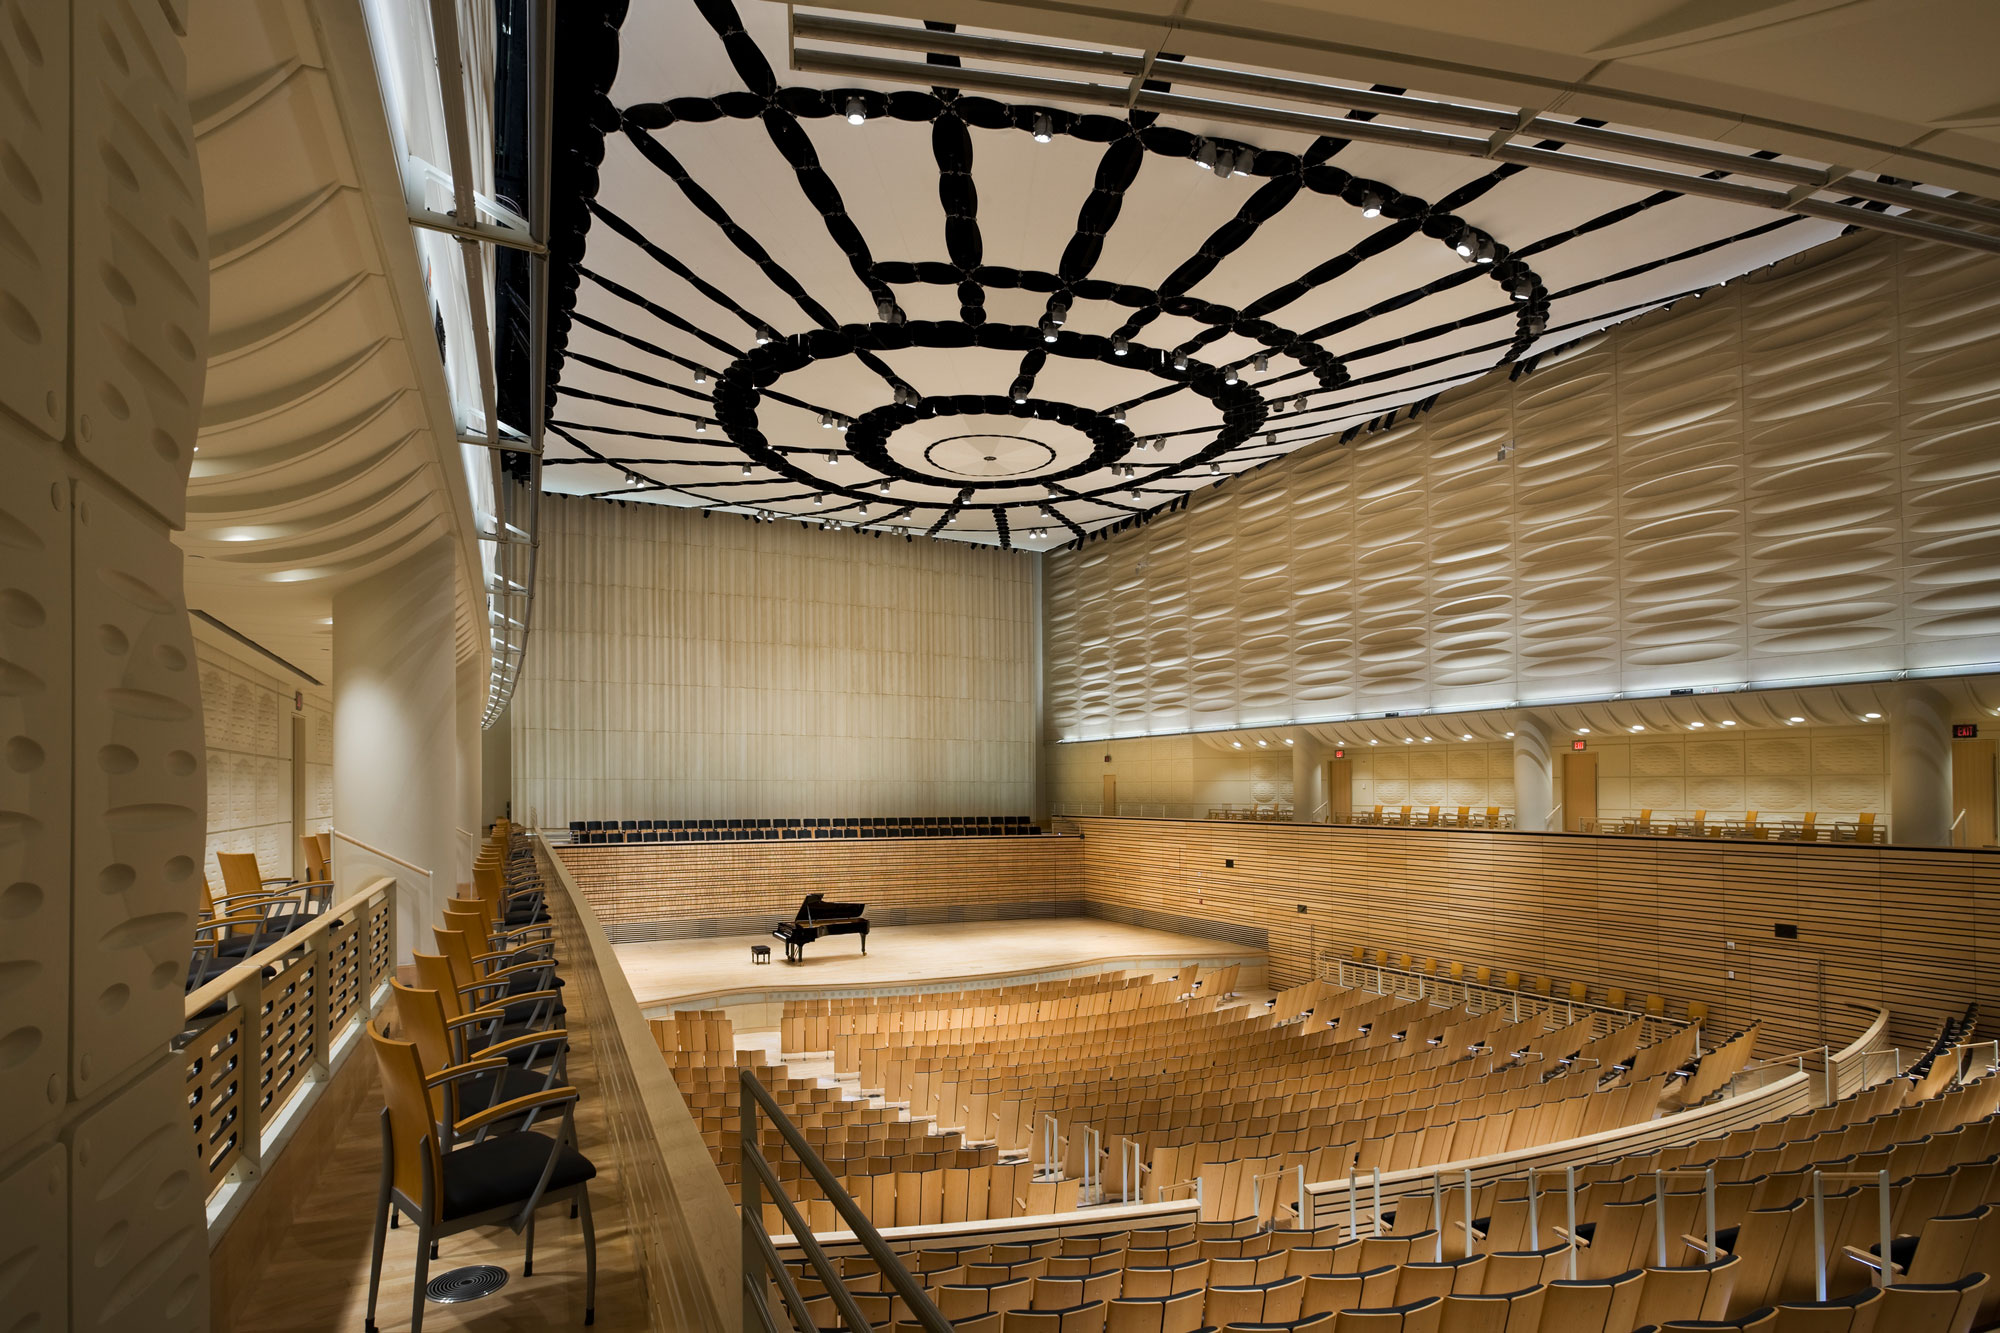 A single grand piano sitting on the empty concert hall stage. 